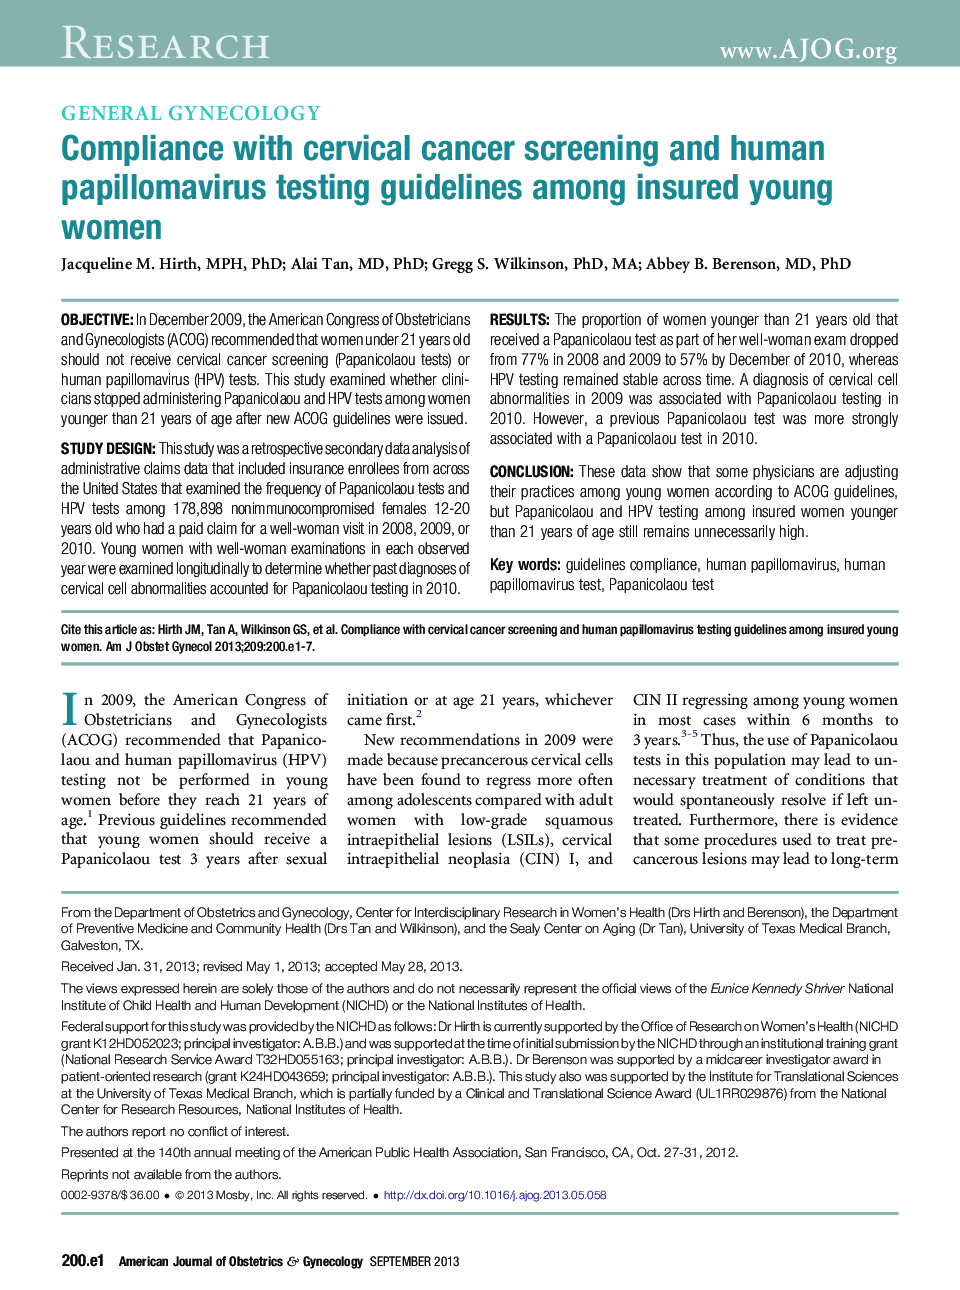 Compliance with cervical cancer screening and human papillomavirus testing guidelines among insured young women